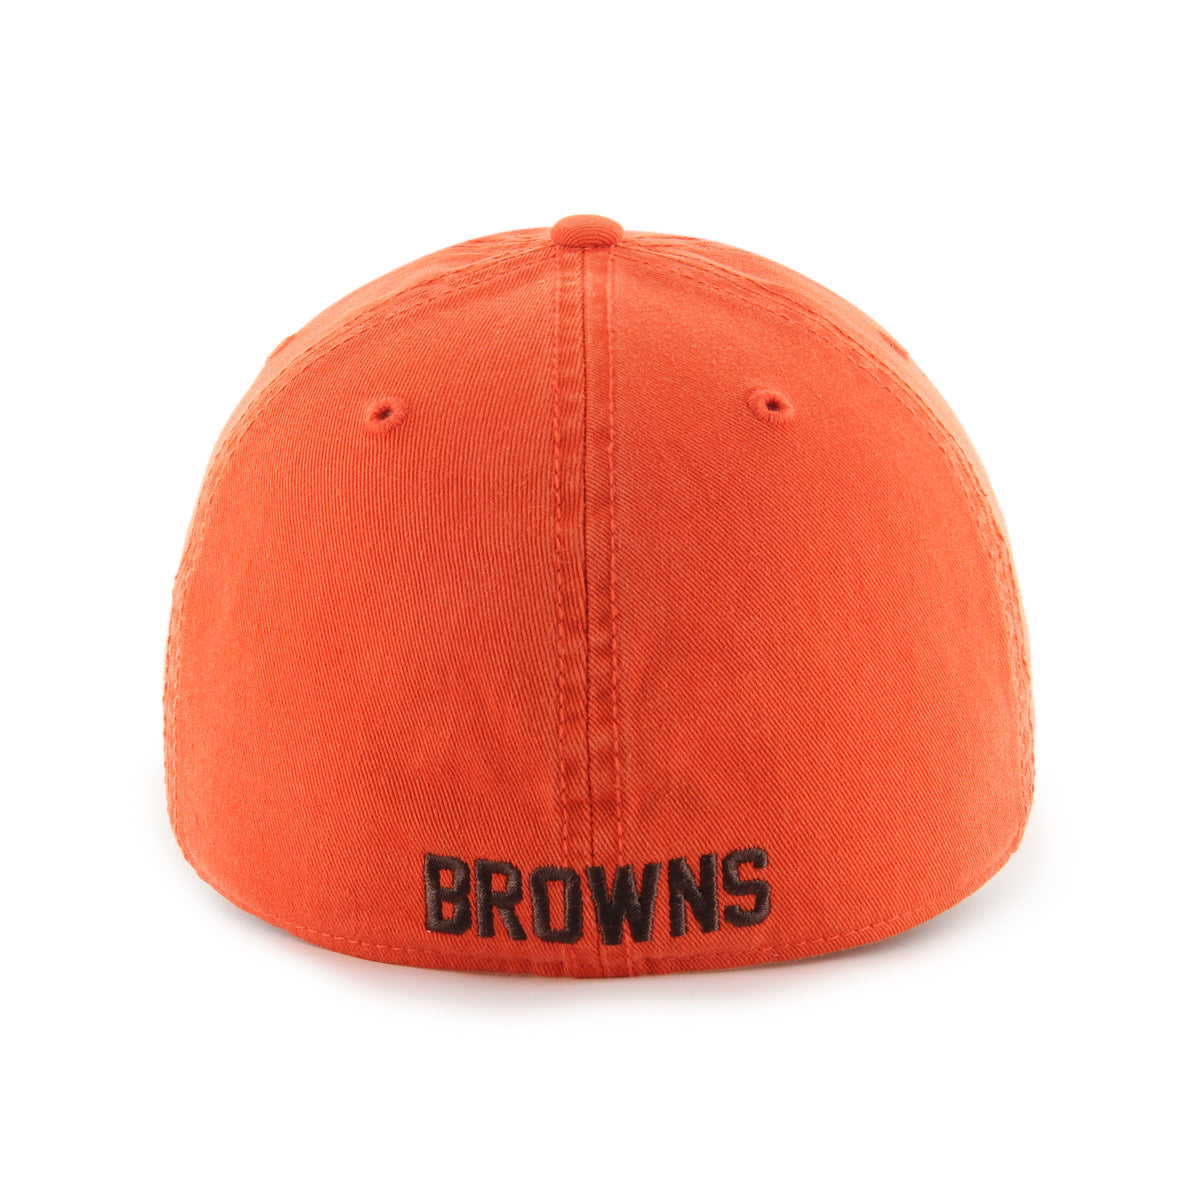 CLEVELAND BROWNS HISTORIC CLASSIC '47 FRANCHISE